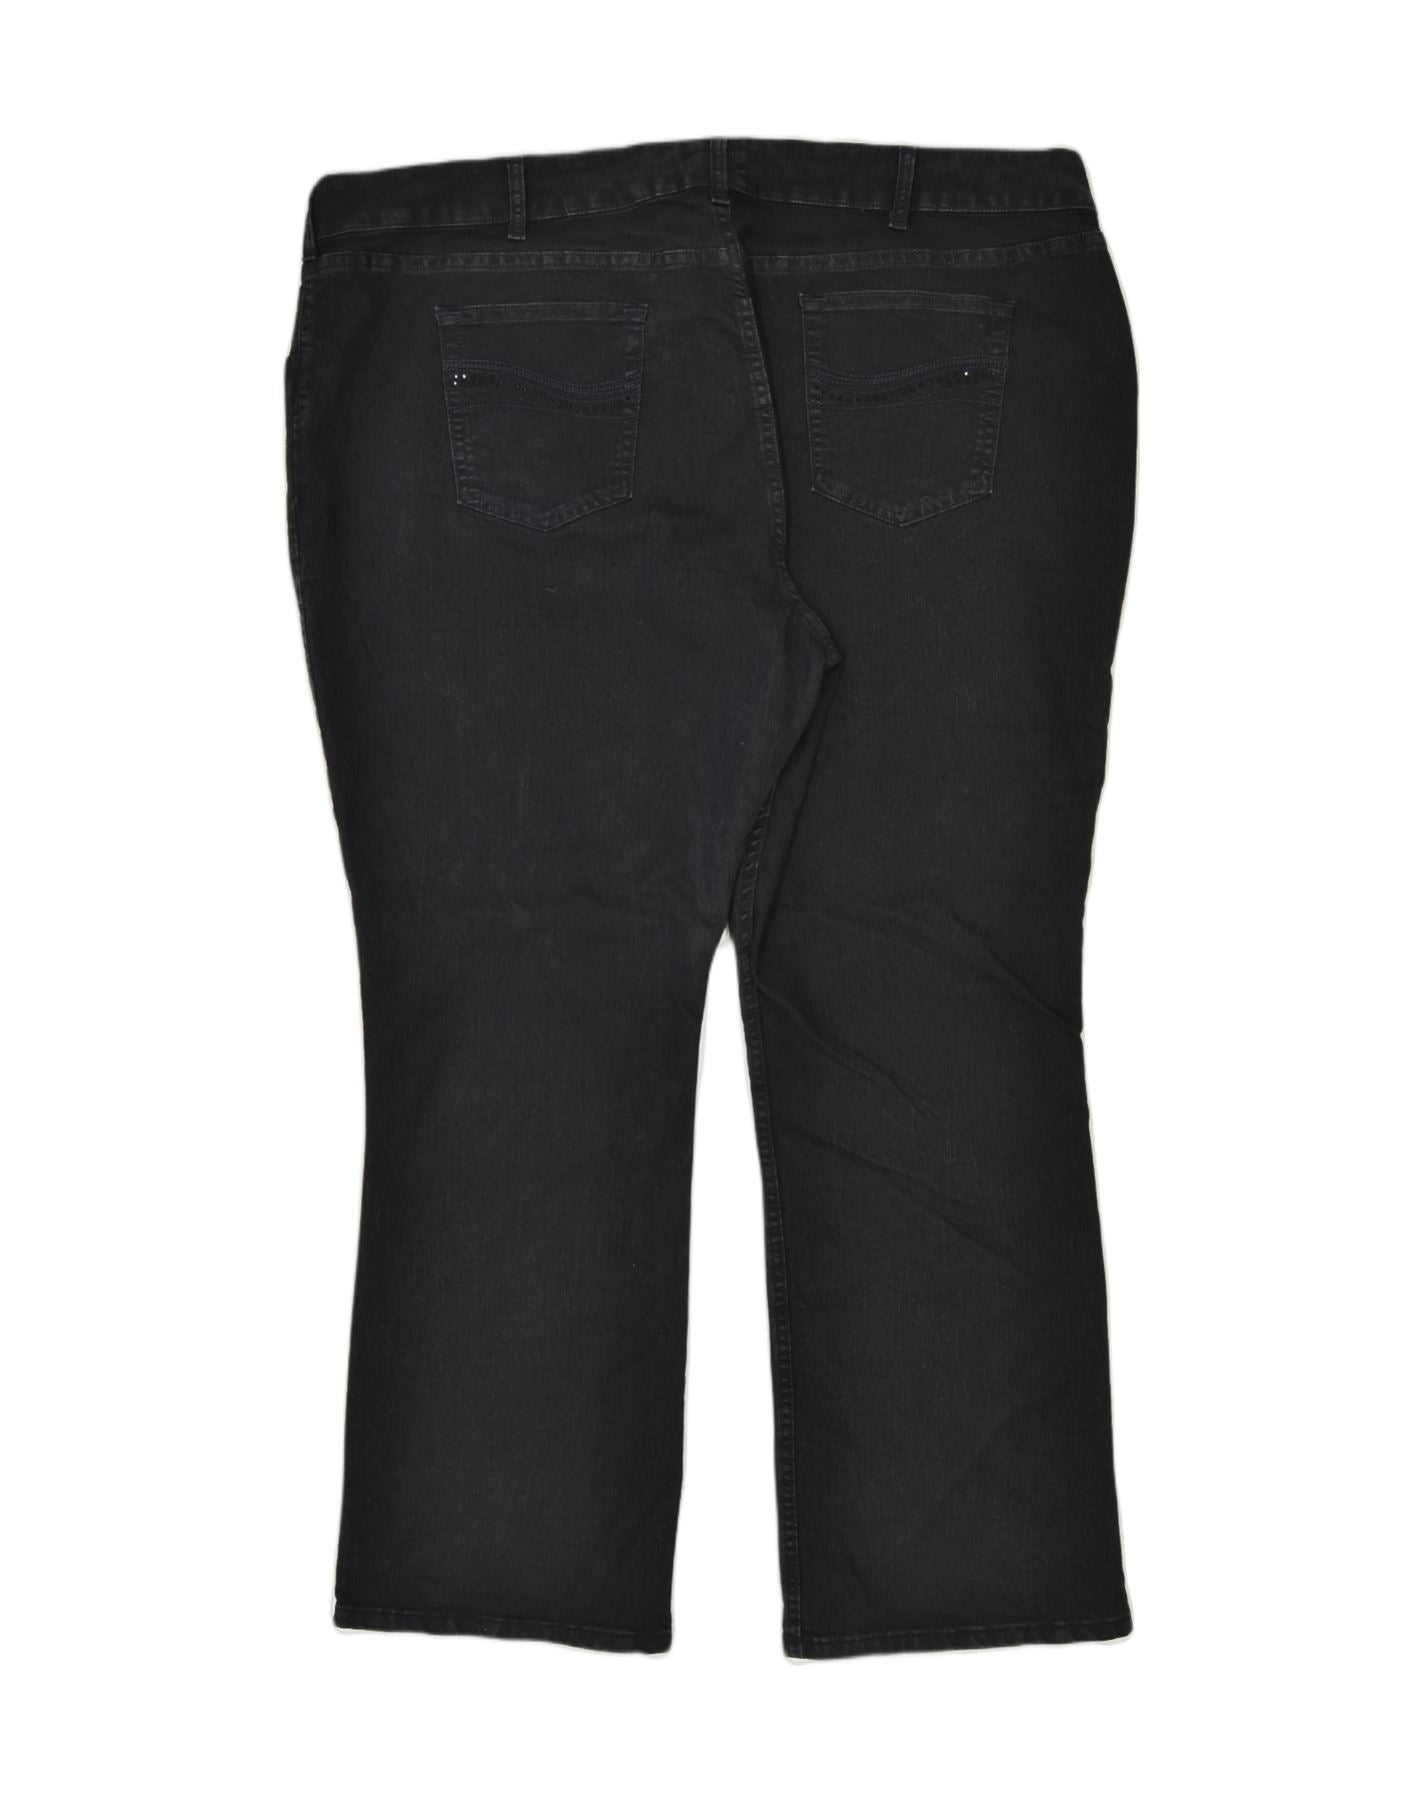 Lee Women's Relaxed Fit Midrise Bootcut Jean 